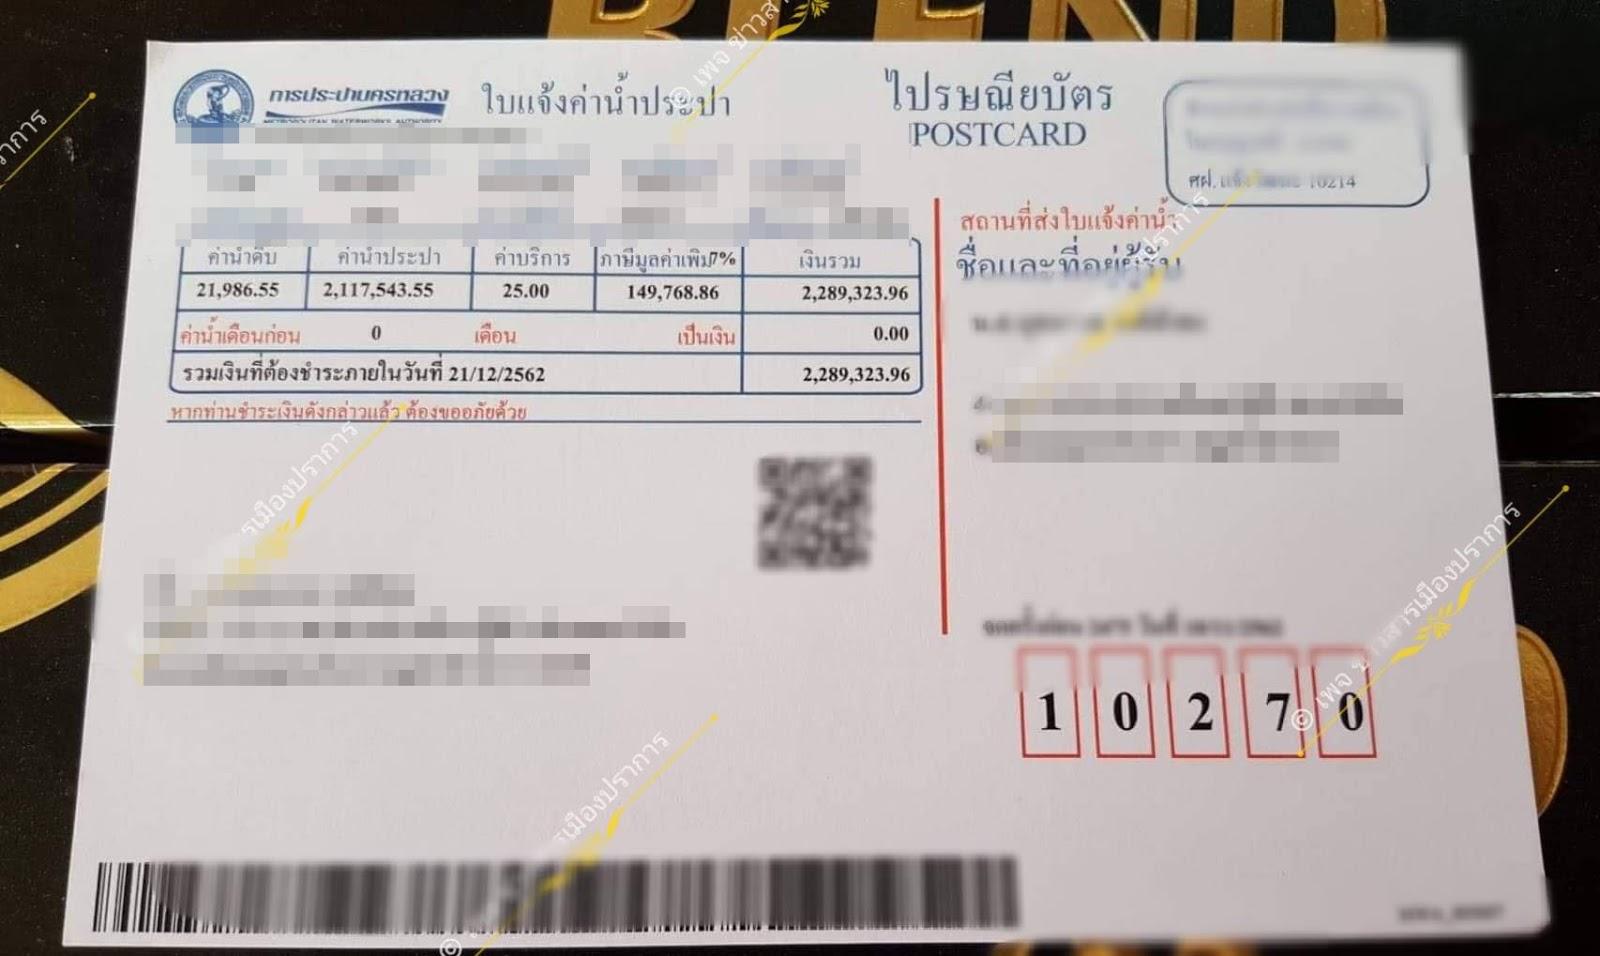 Man Shook Over 2 Million Baht Water Bill, Turns Out To Be Typo